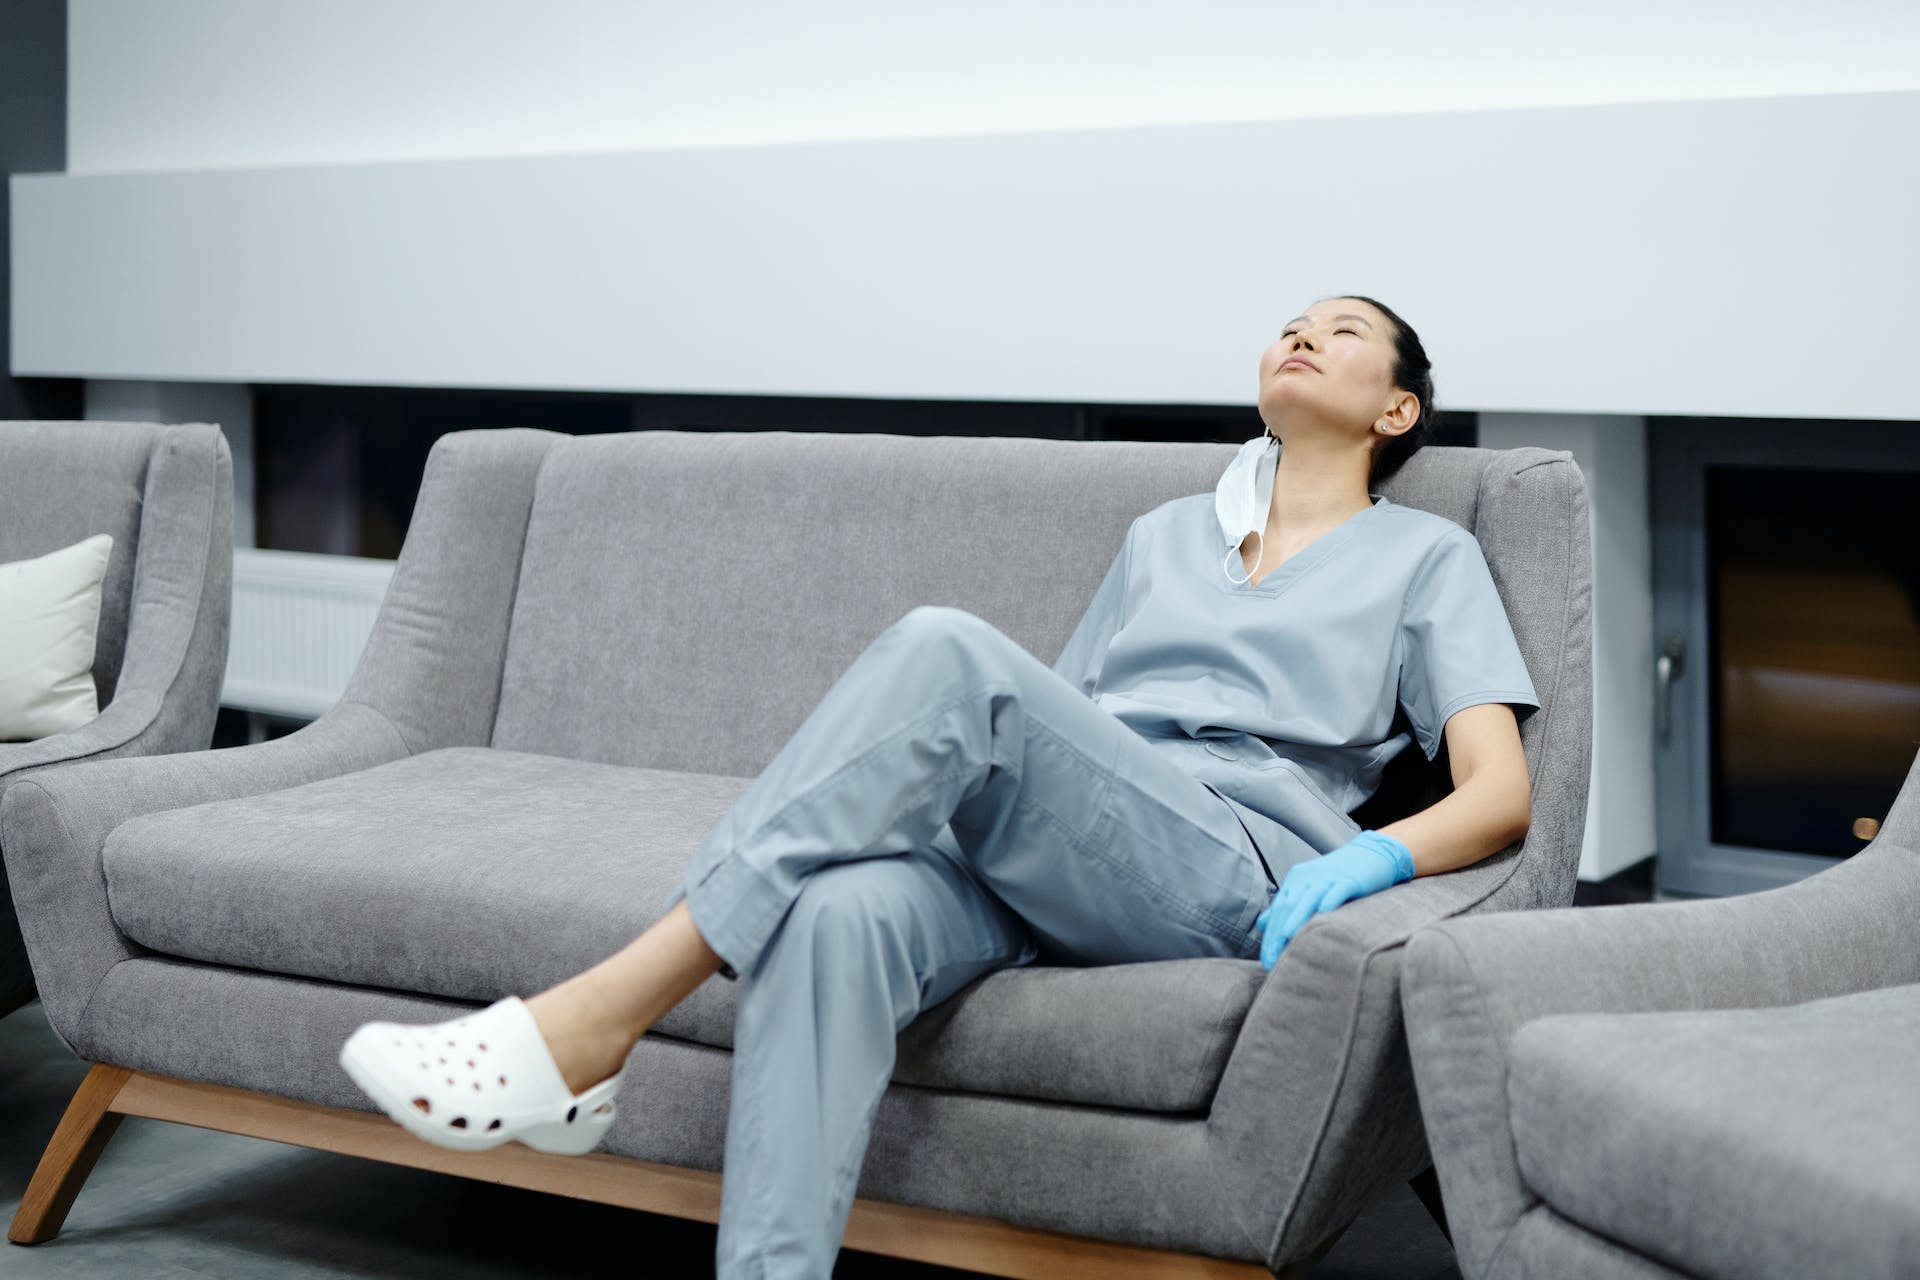 Nurse resting on a couch | Source: Pexels